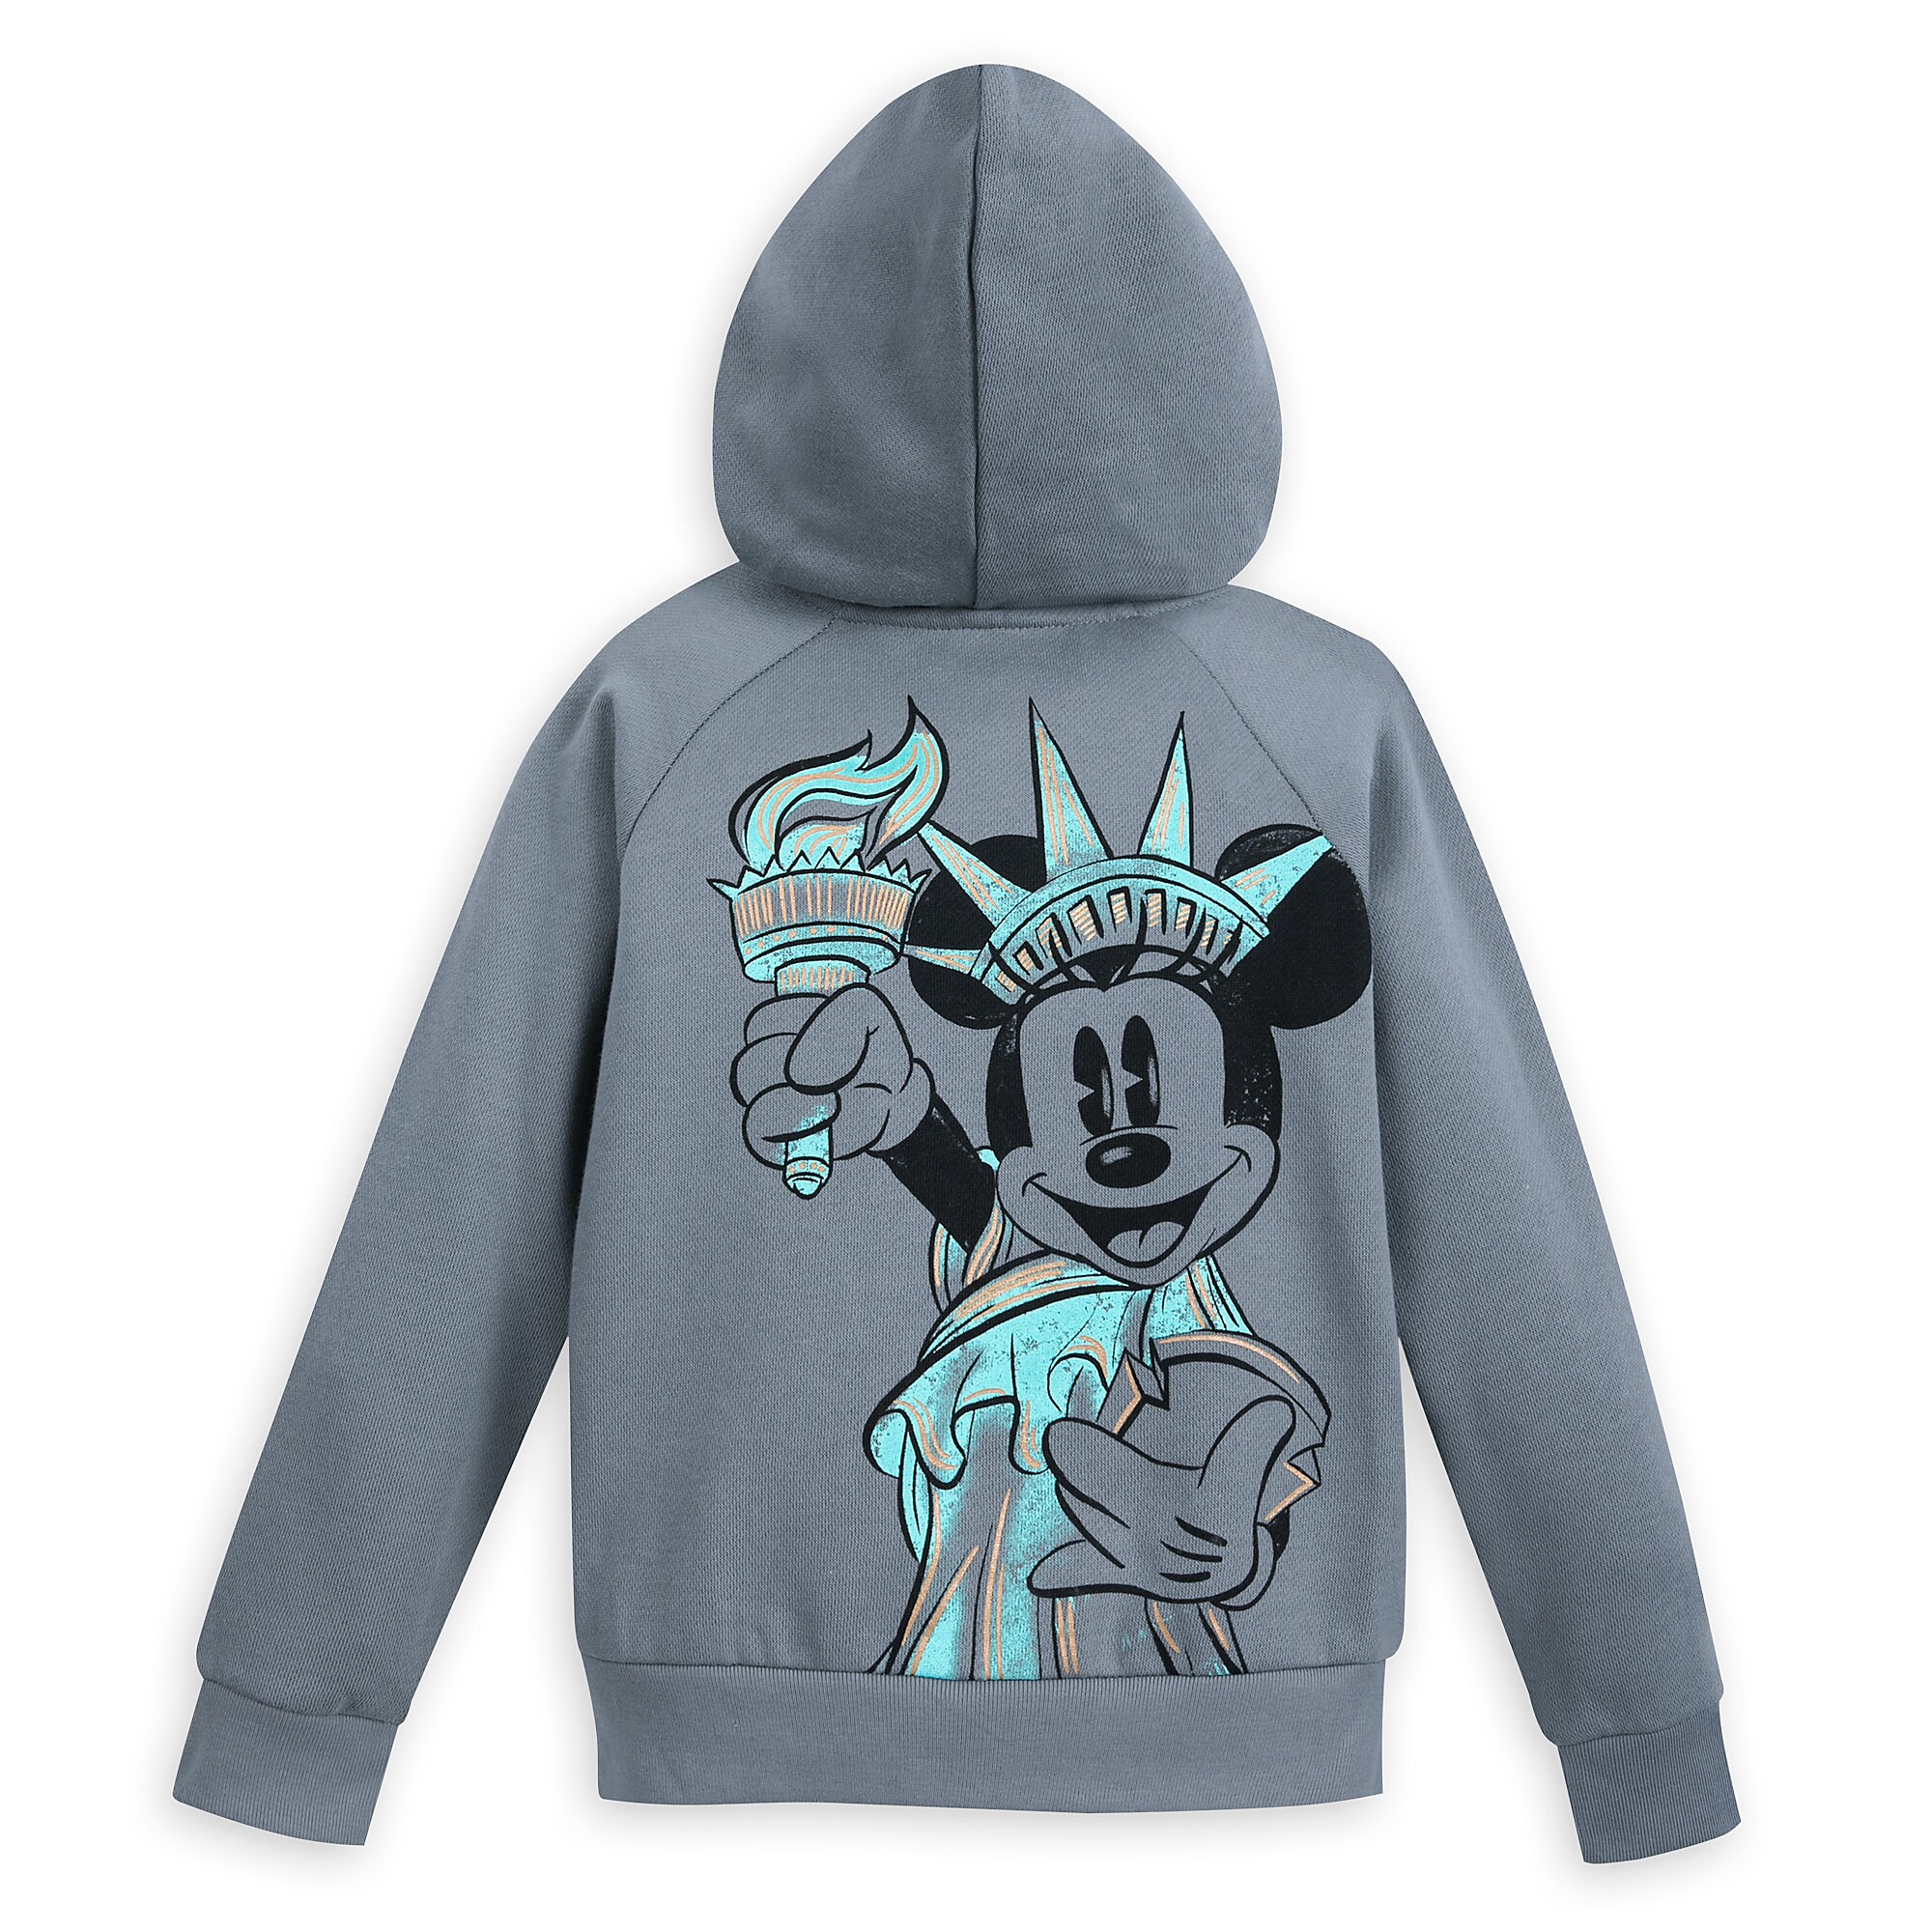 Minnie Mouse Statue of Liberty Hoodie for Girls - New York City